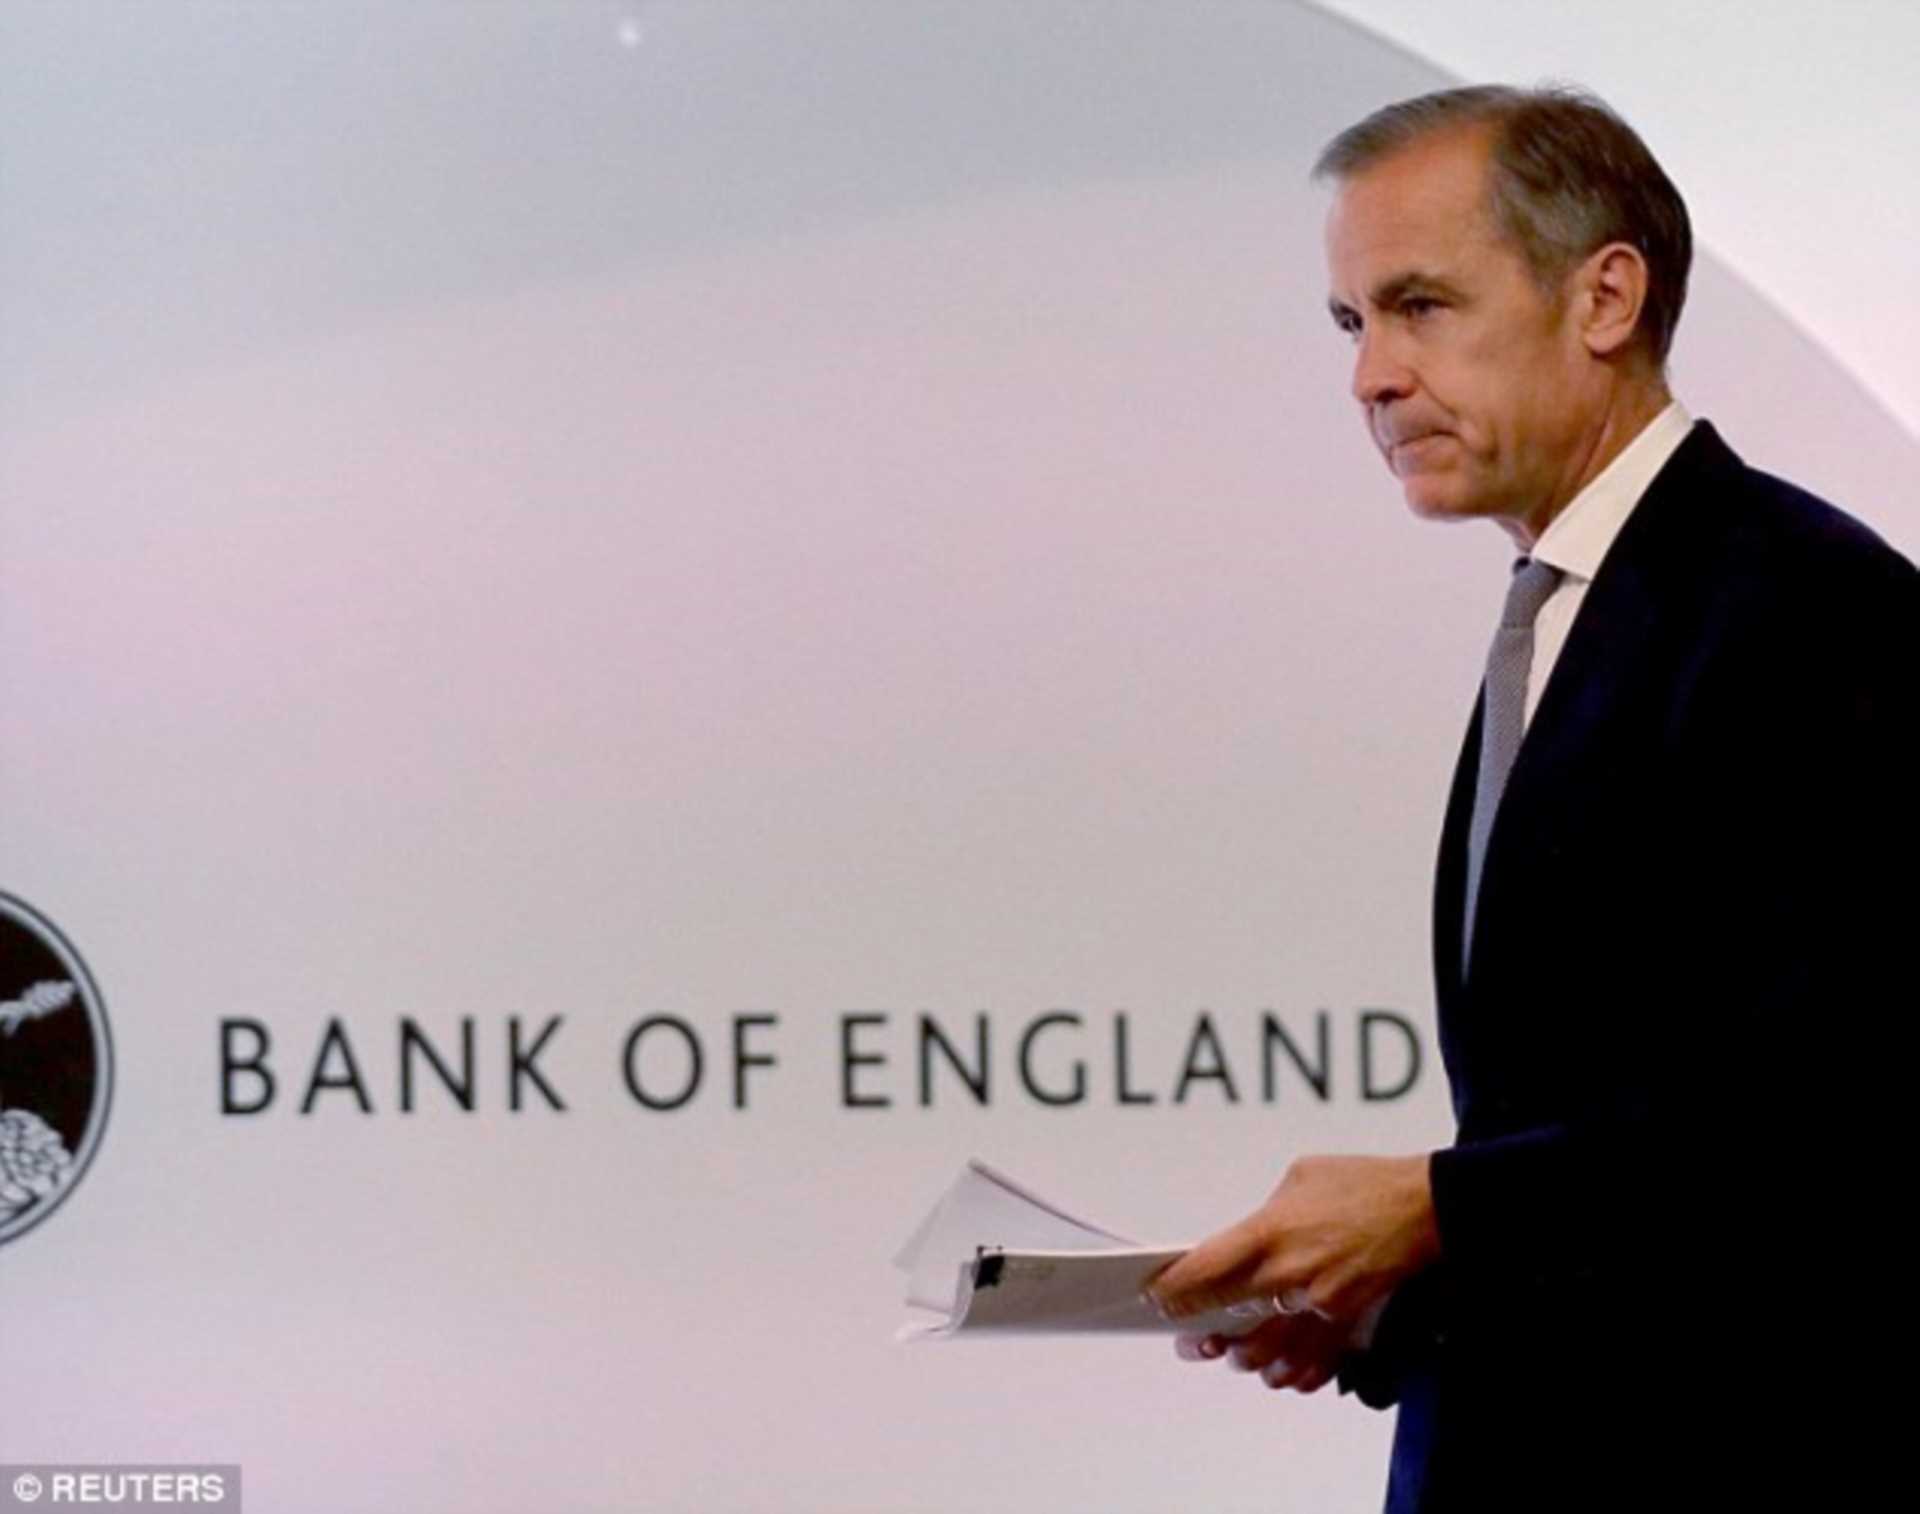 Bank of England finally raises interest rates by 0.25% to 0.75%. But why?